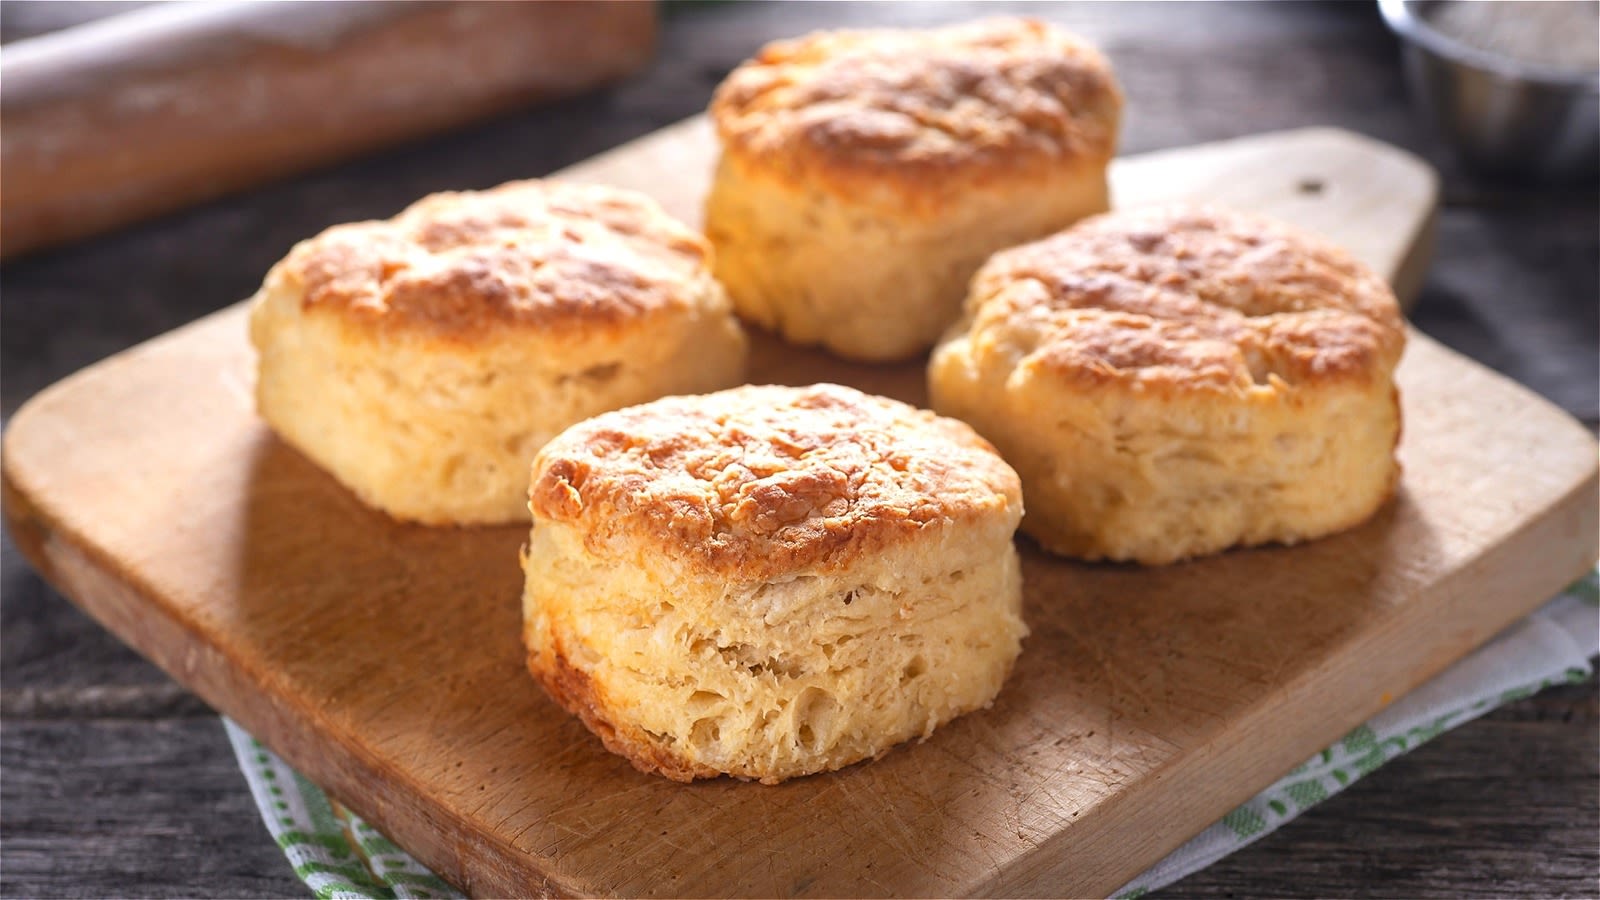 For The Best Store-Bought Canned Biscuits, Don't Overlook This Classic Brand